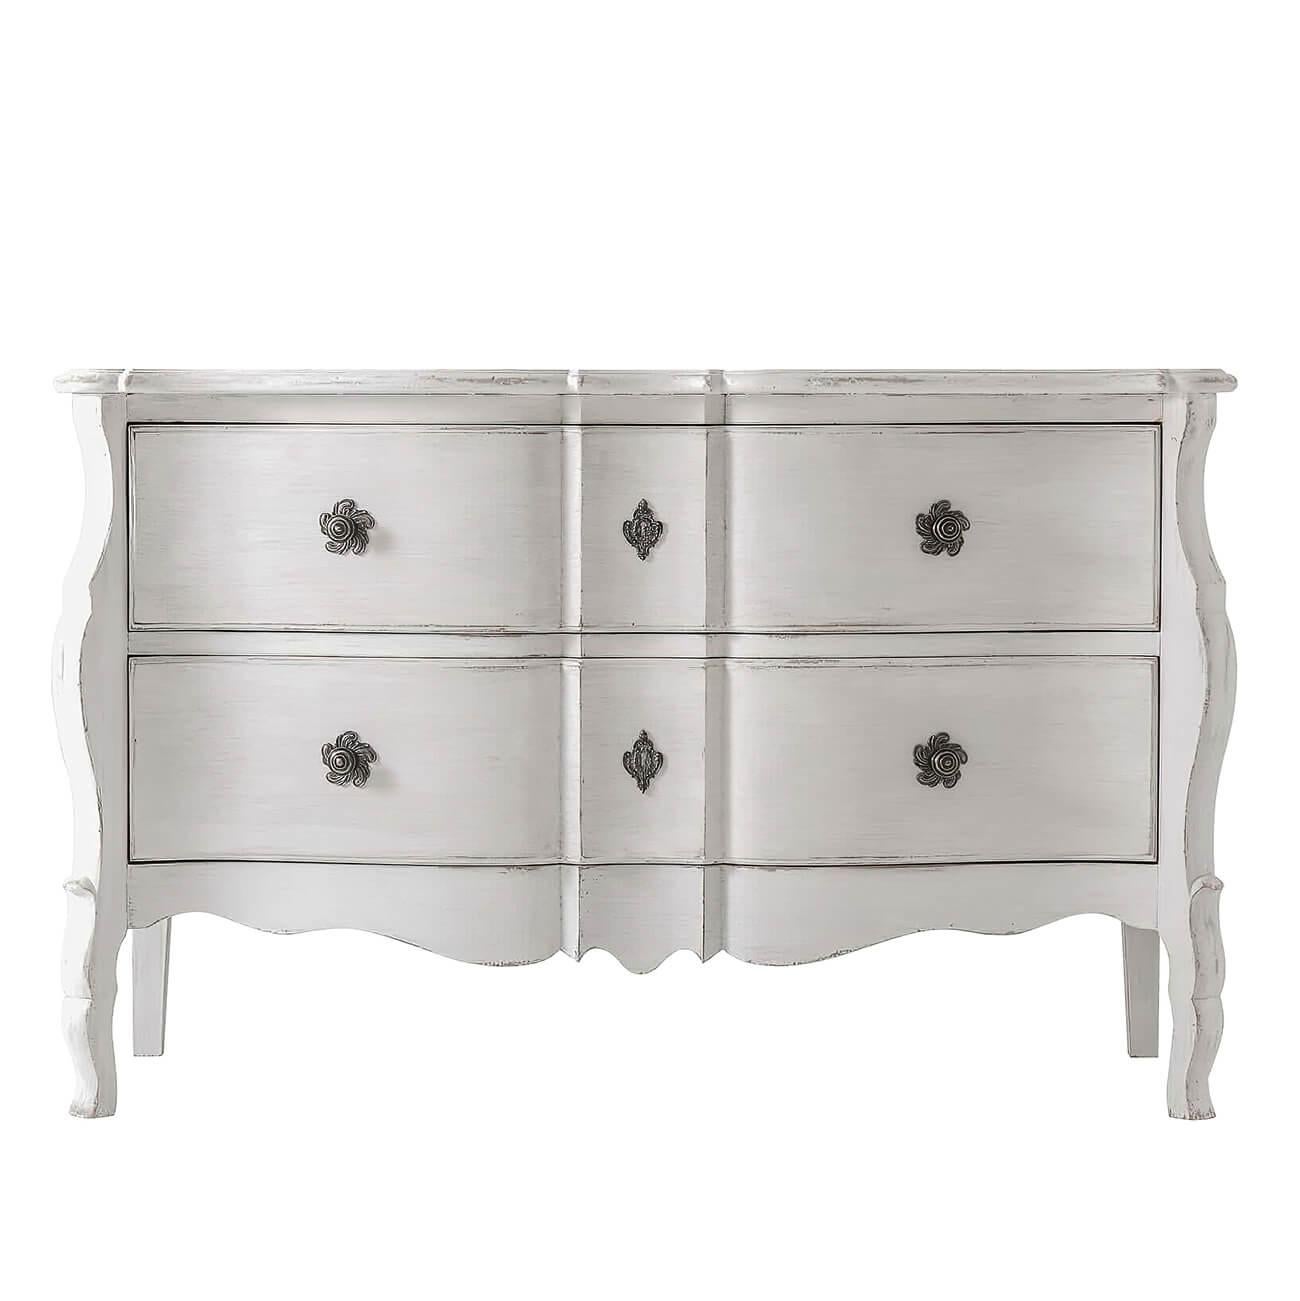 European distress painted rococo style serpentine dresser with a serpentine form molded edge top, and a scalloped apron and angled legs with swirl pewter antique style handles and escutcheons.

Dimensions: 52